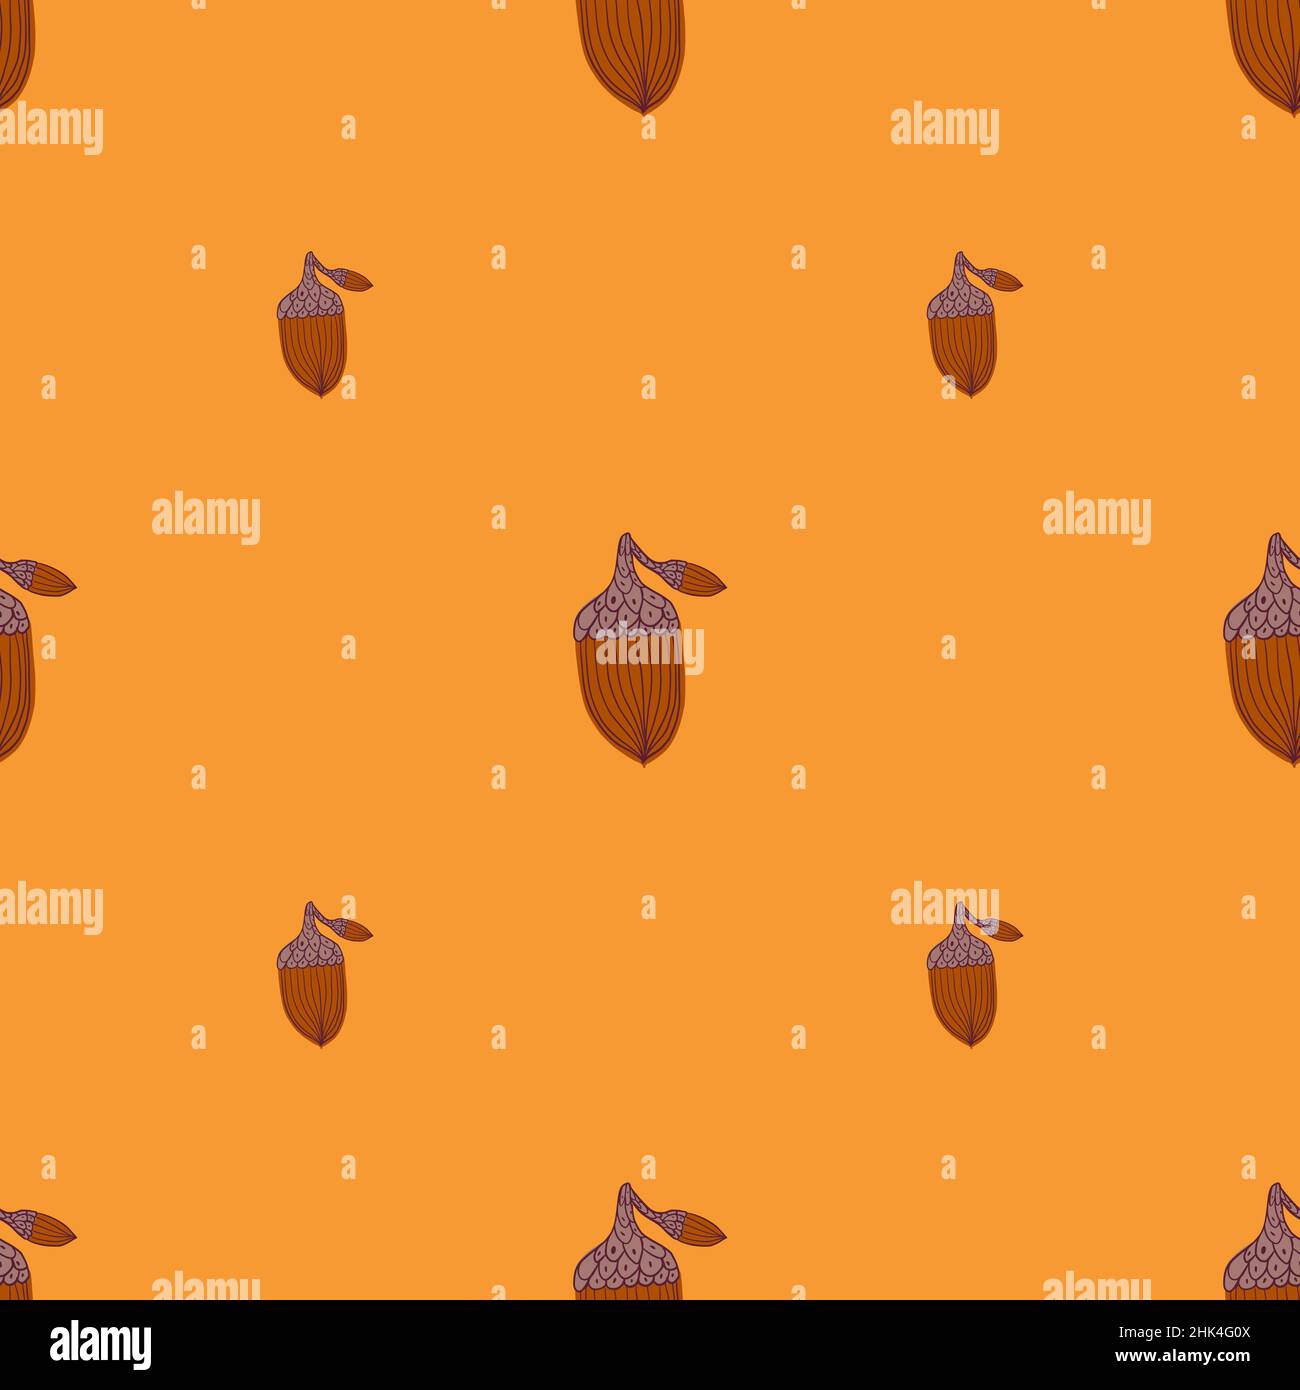 Minimalistic style seamless pattern with brown acorn silhouettes print. Orange background. Simple style. Vector illustration for seasonal textile prin Stock Vector